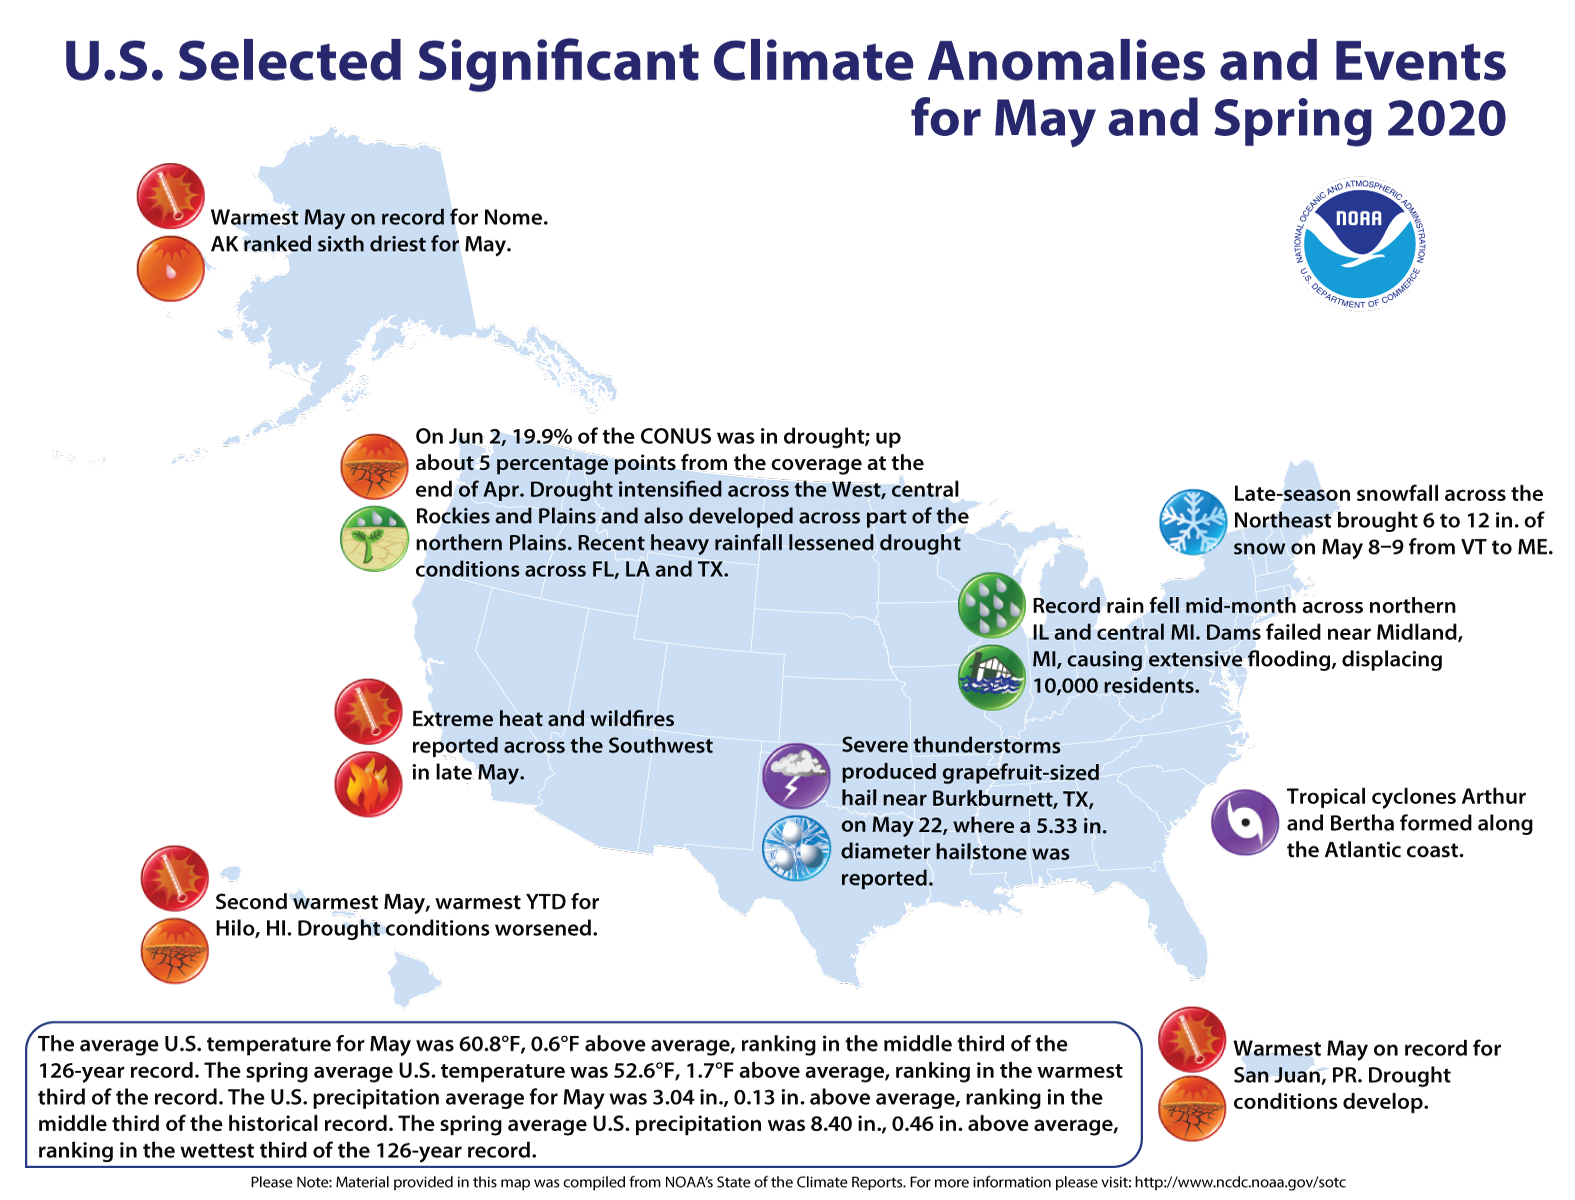 An annotated map of the United States showing notable climate and weather events that occurred across the country during May 2020. For details, please visit http://bit.ly/USClimate202005.